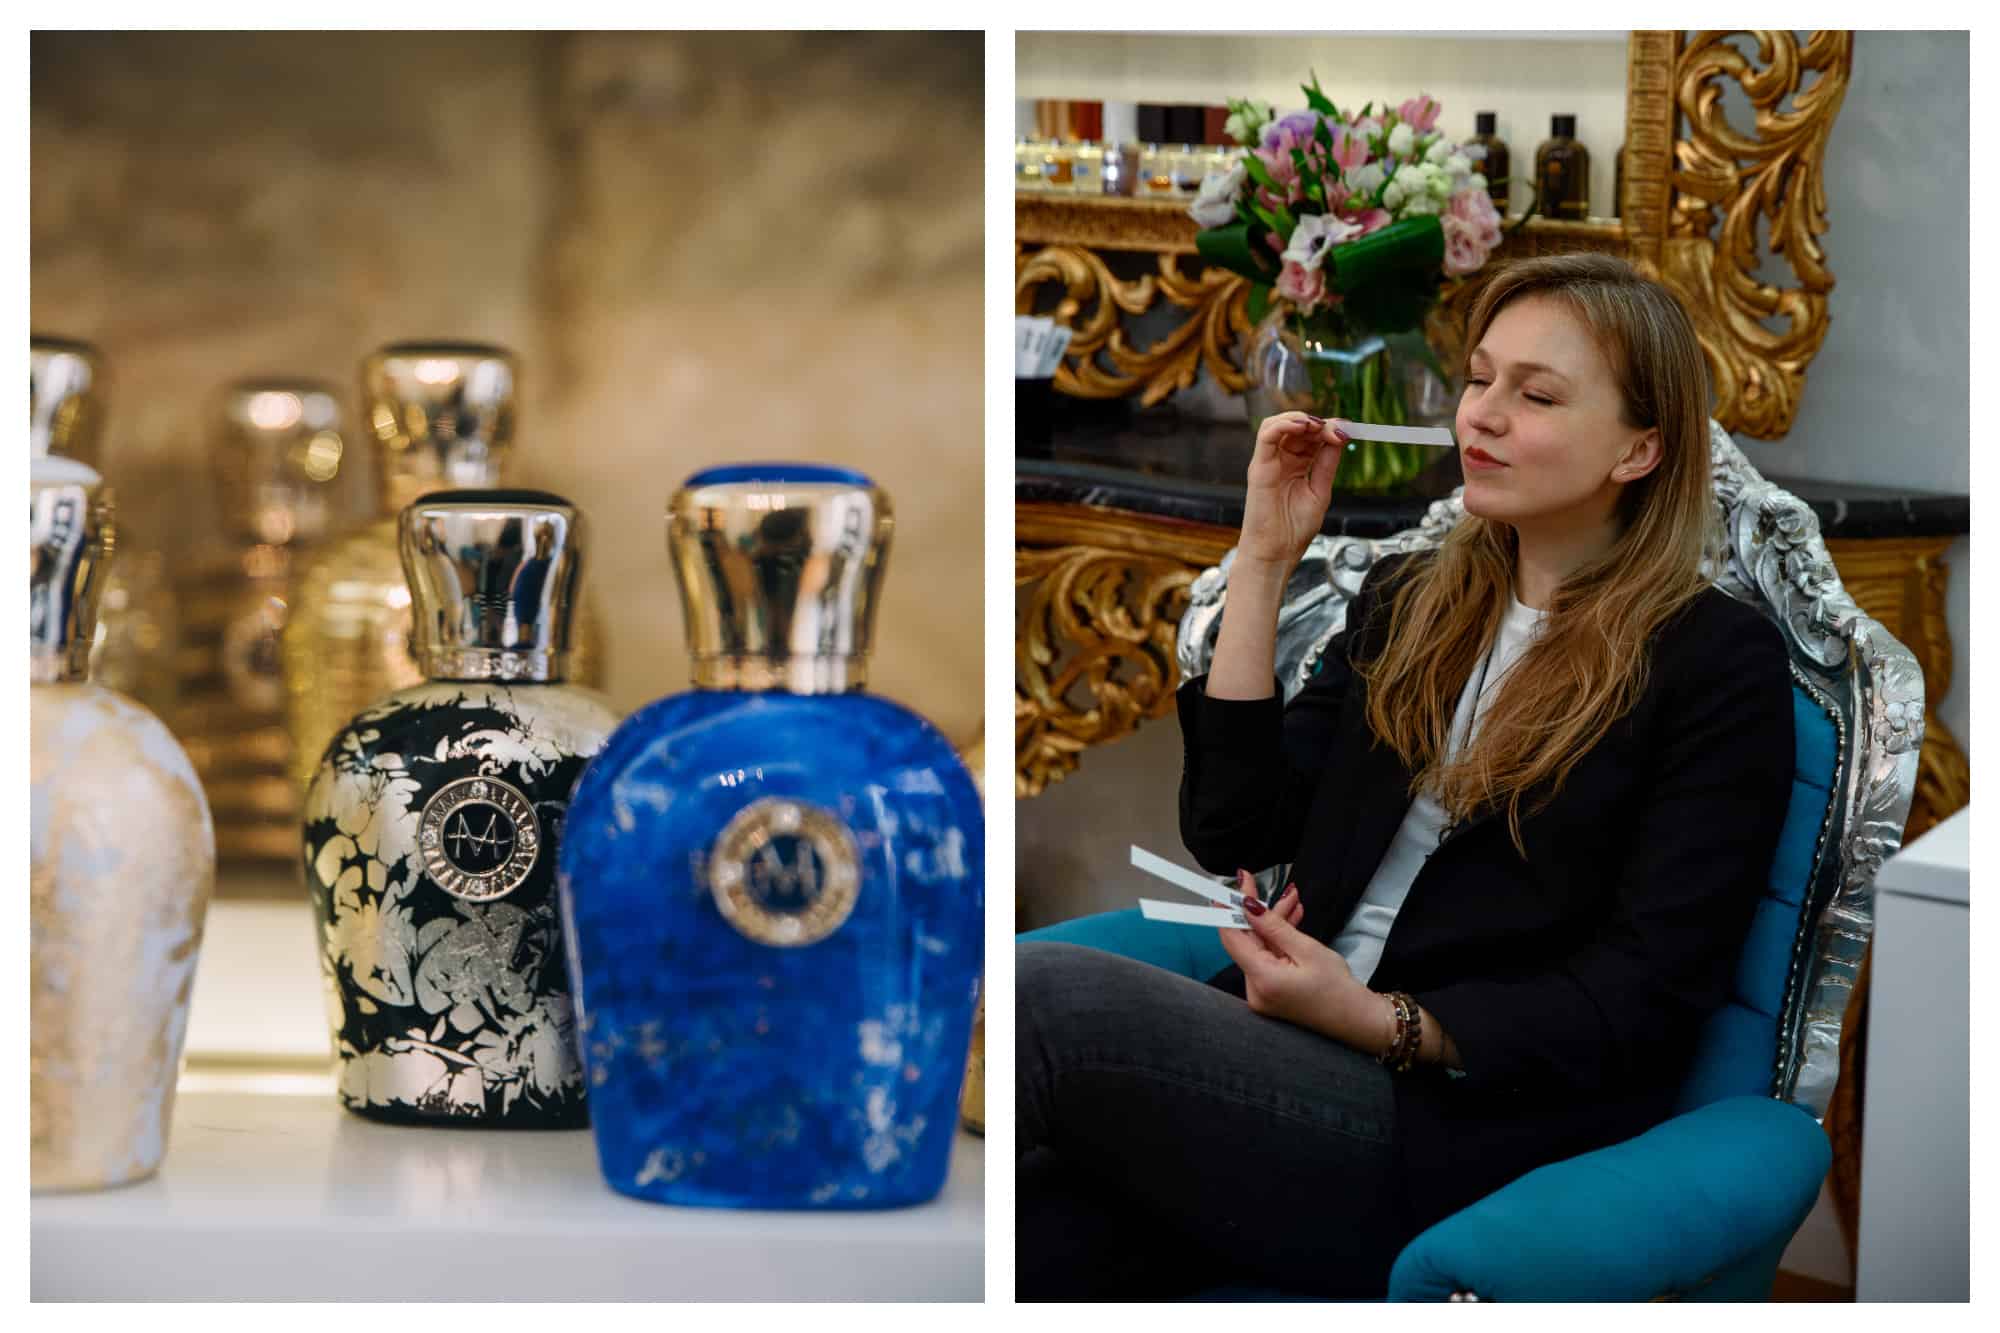 On left: Beautifully decorated jars of perfume sit on a counter, waiting to be tested at Sensory Unique, a shop specializing in stocking exclusive, niche perfumes in Paris. On right: A woman closes her eyes, concentrating on the smell of the perfume she samples at Sens Unique, a boutique specializing in niche perfume and finding your perfect scent. 